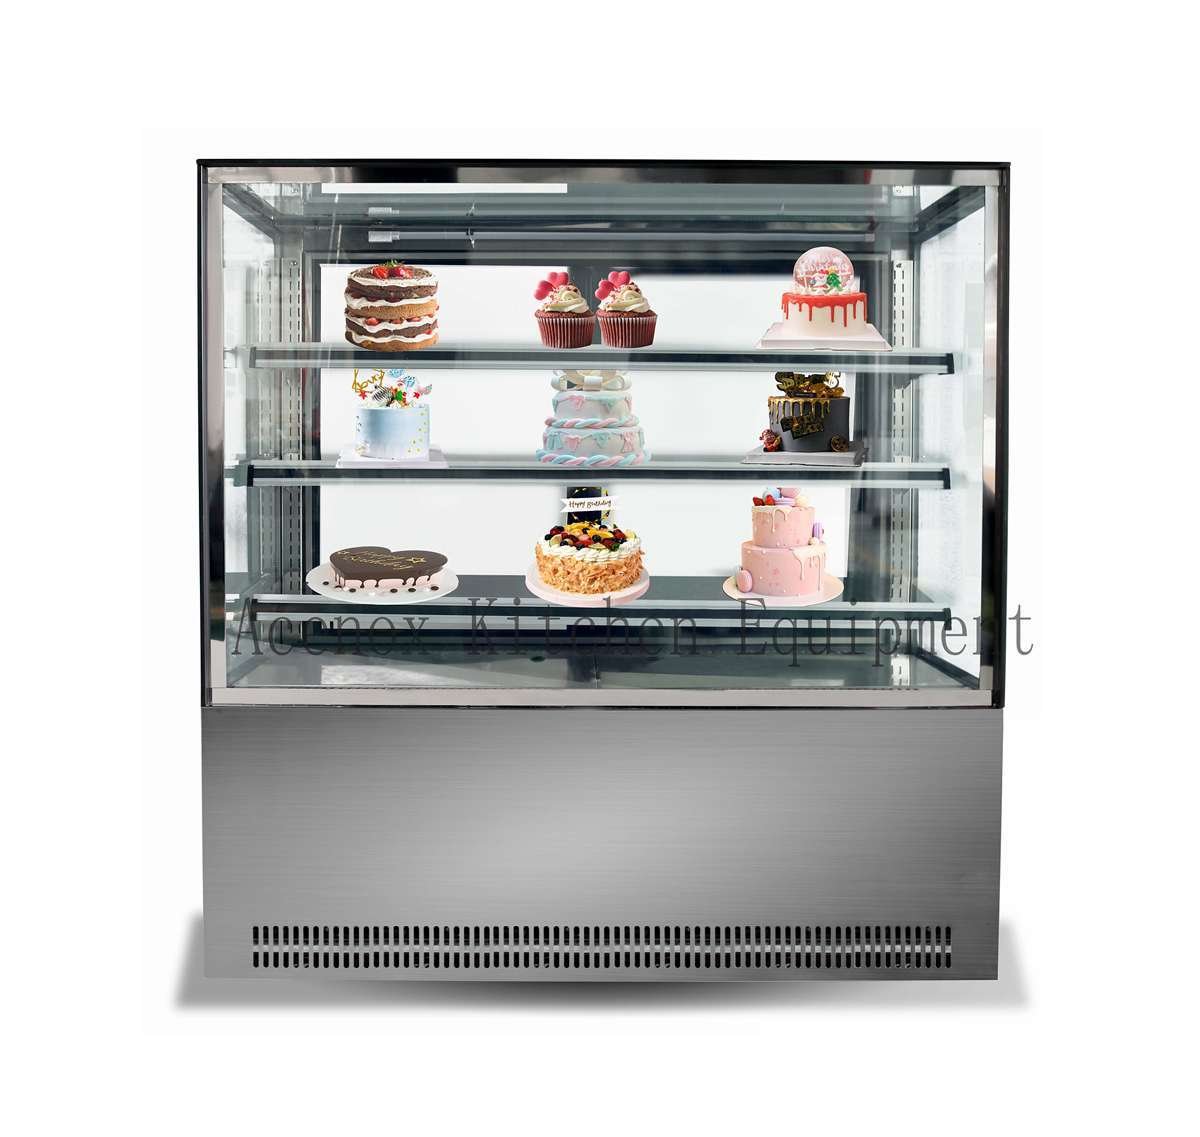 How you can use display fridges to improve your bakery - Blog